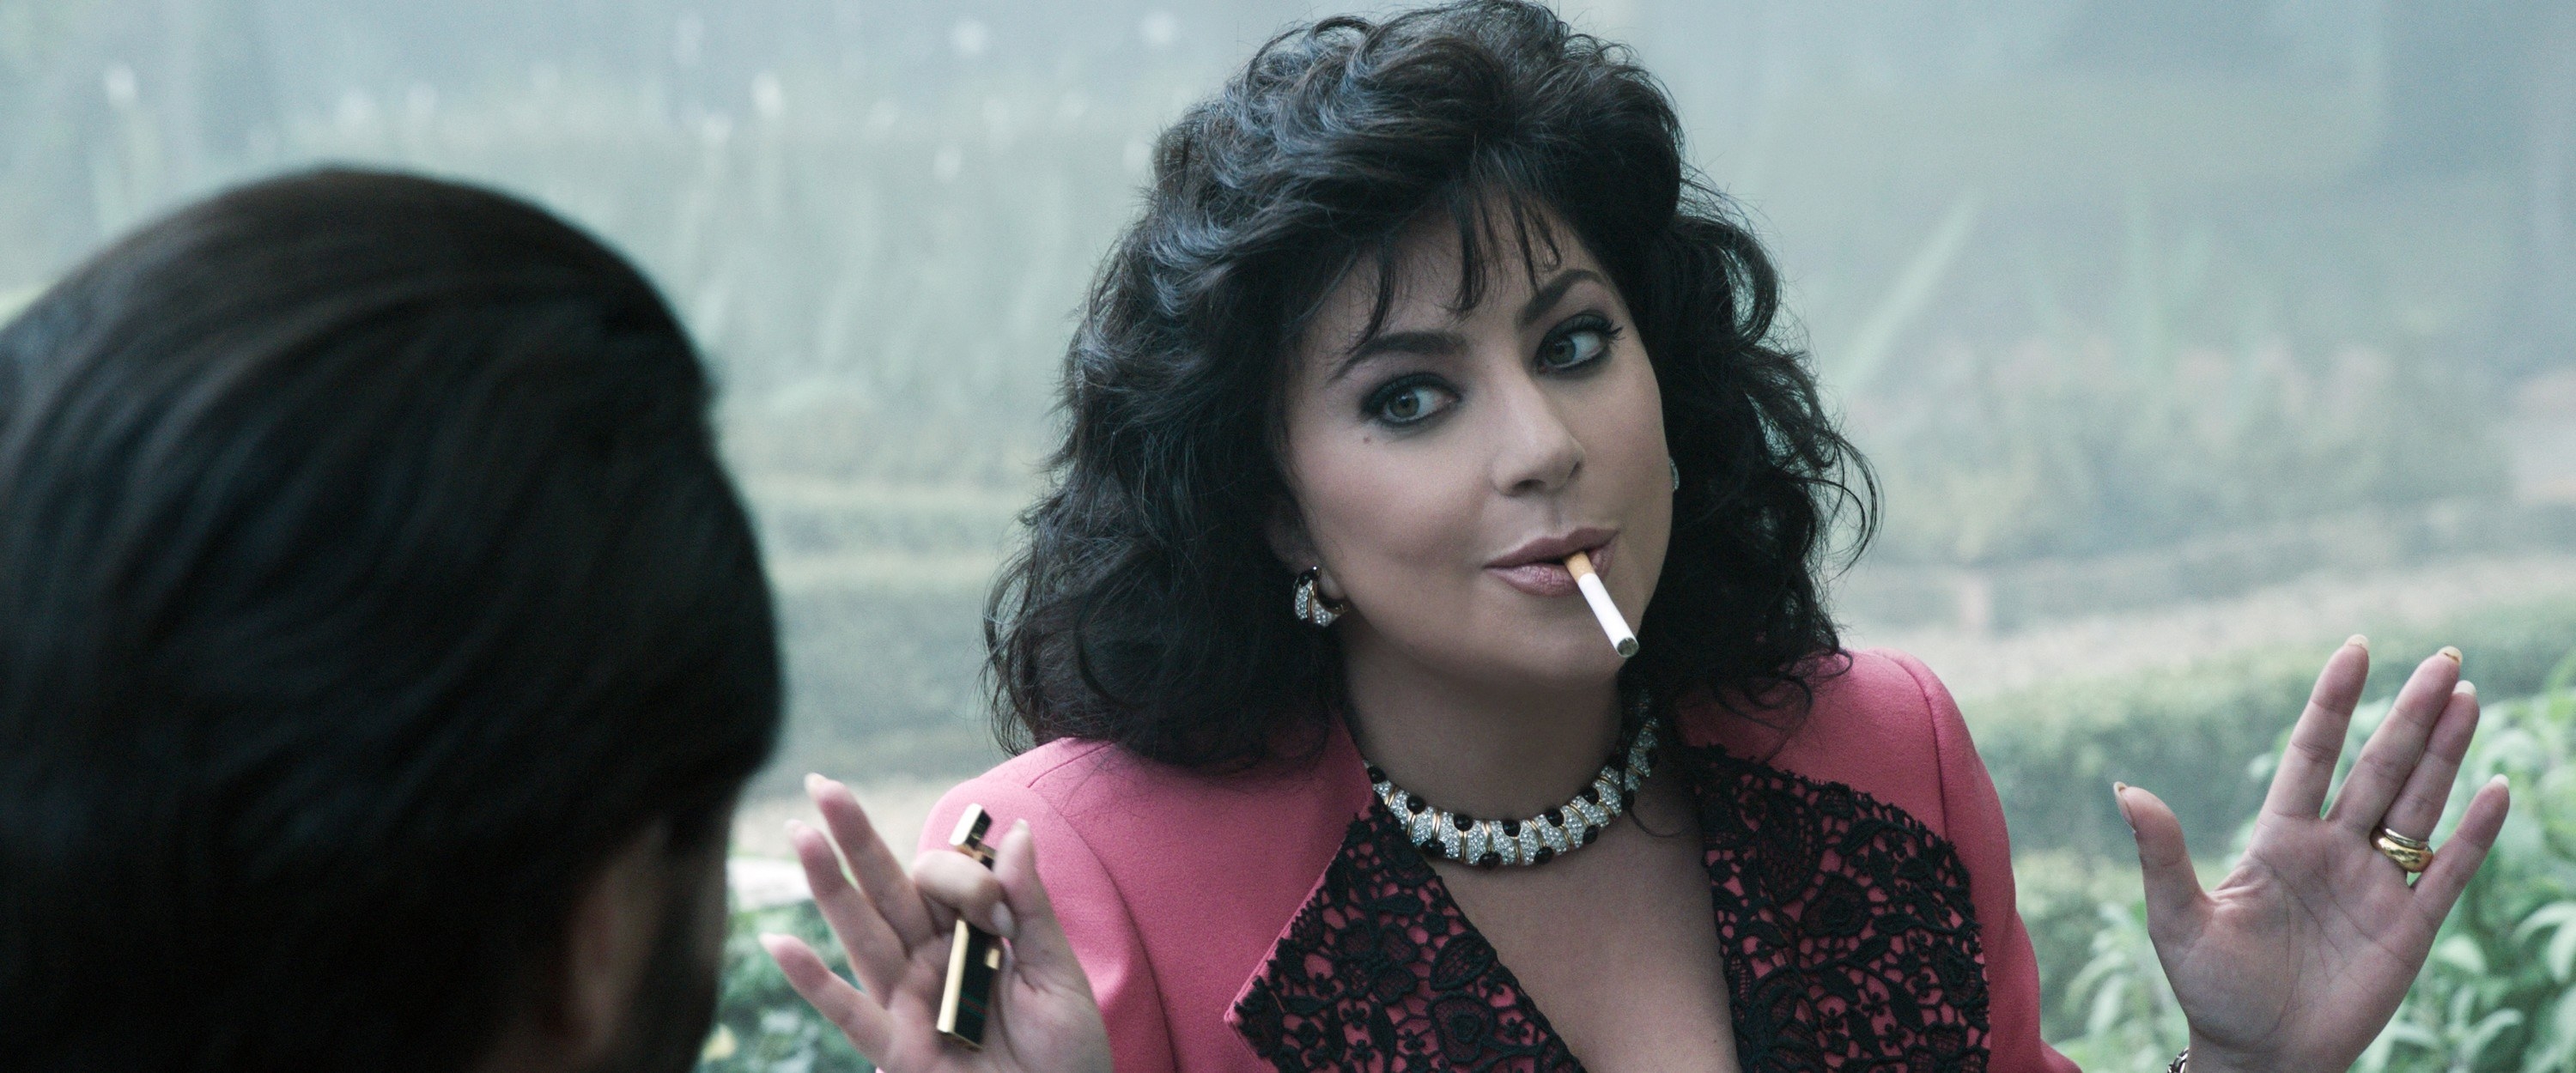 Gaga as Patrizia with a cigarette in her mouth